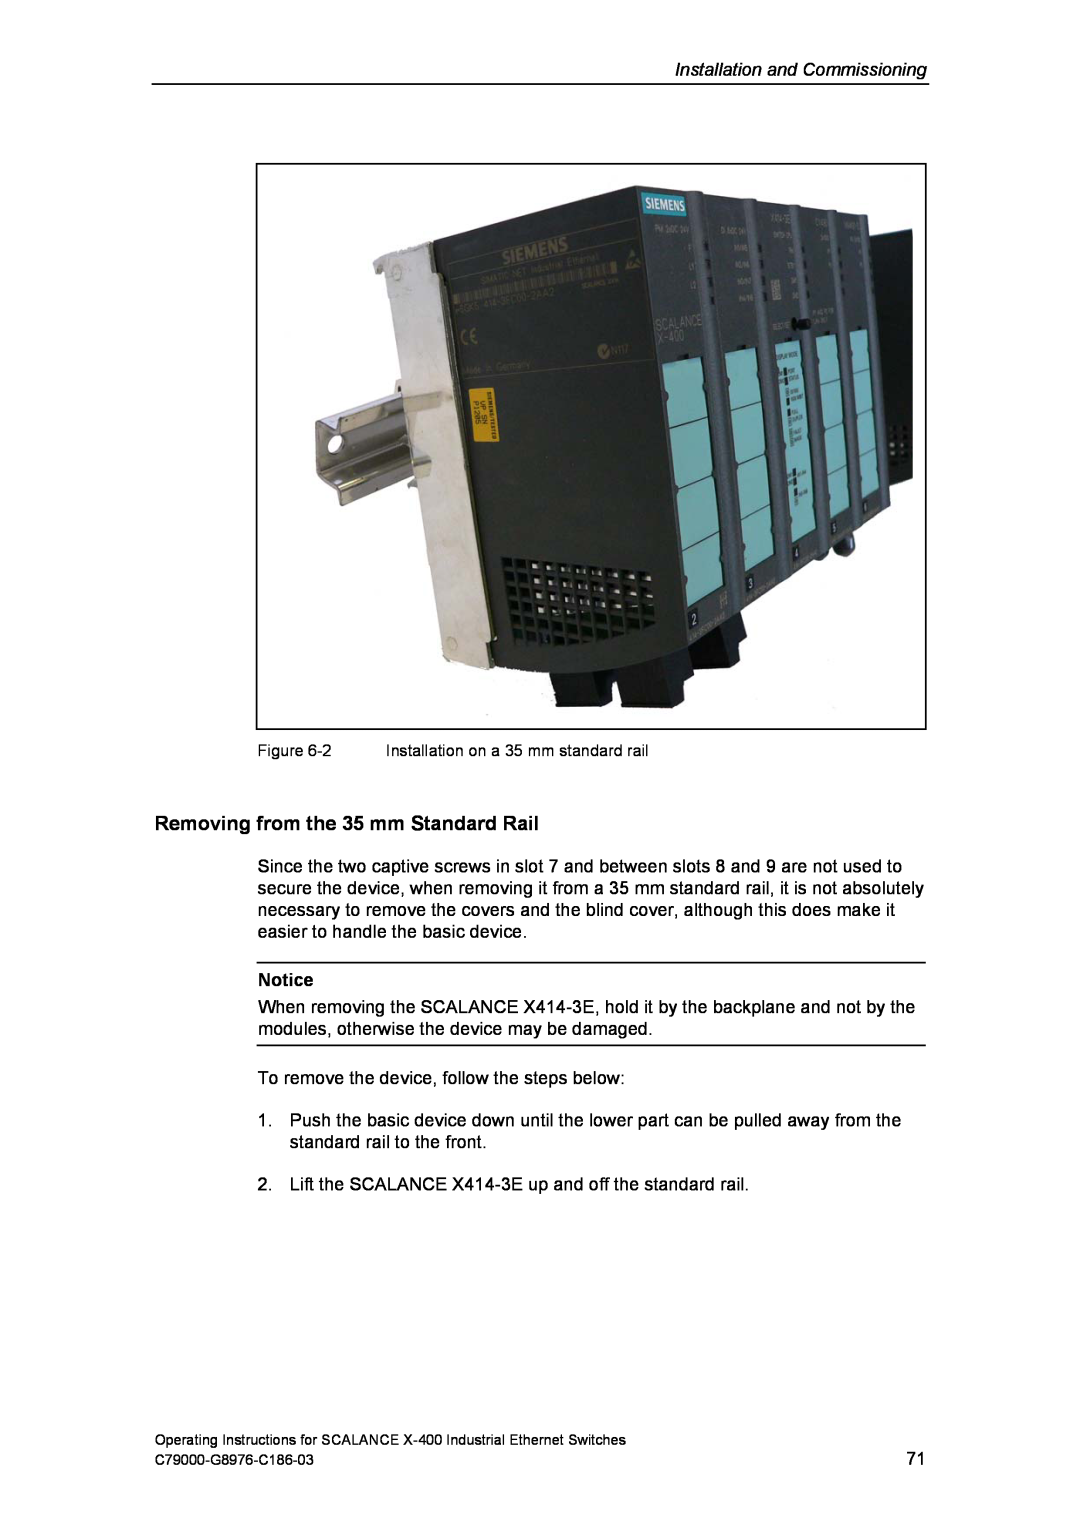 Siemens X-400 technical specifications Removing from the 35 mm Standard Rail, Installation and Commissioning 